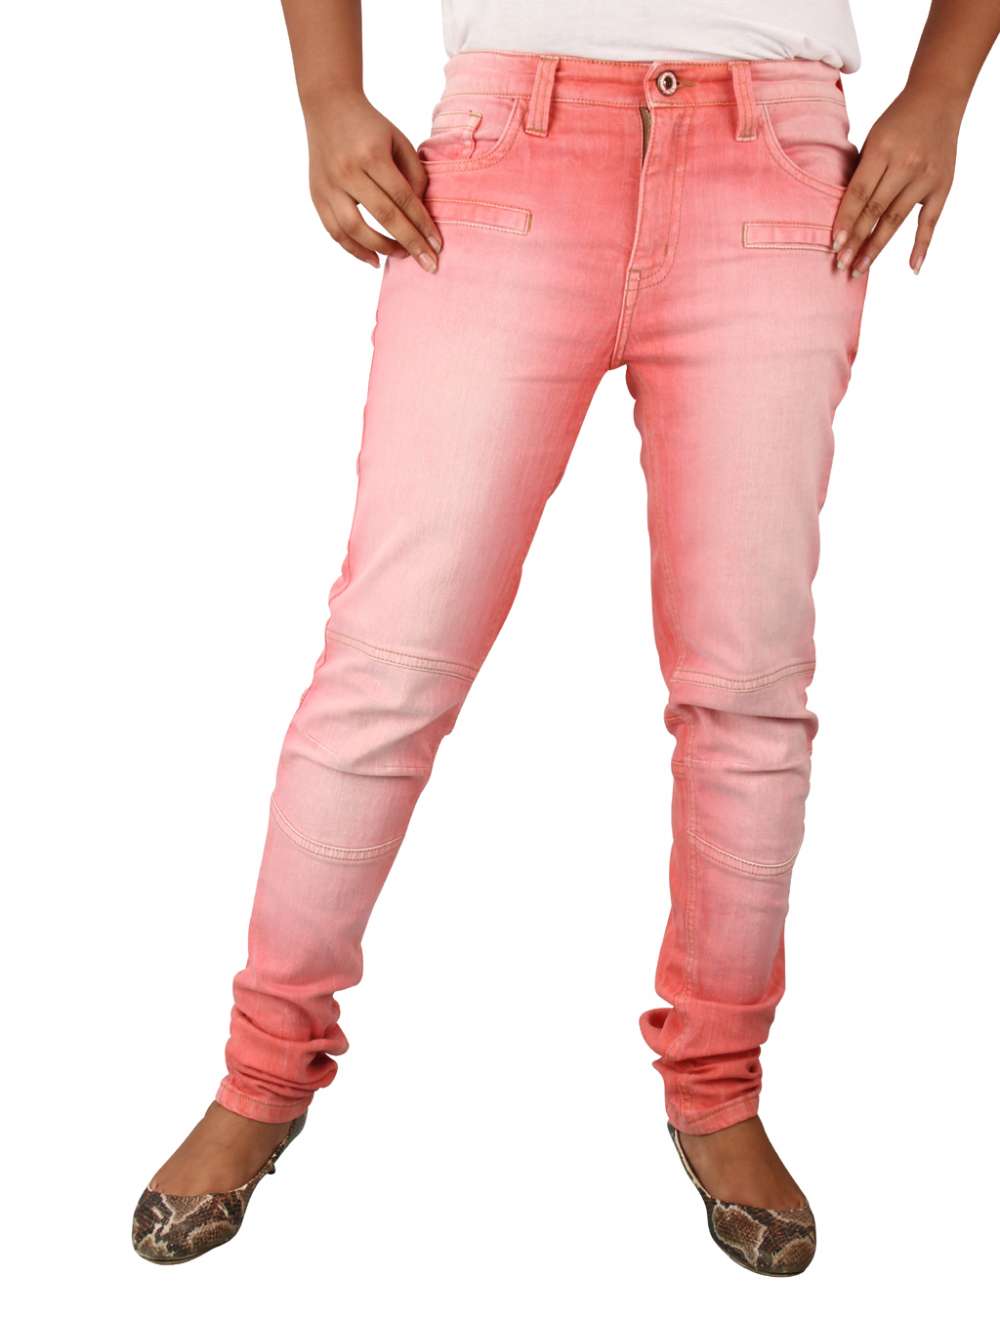 PINK SLIM FIT JEANS FOR COLORFUL WOMEN (WOMEN'S JEANS-PFL-638), 98% Cotton  2% SPANDEX DENIM, 11.00 OZ- RFD – Piangka Fashion Limited.